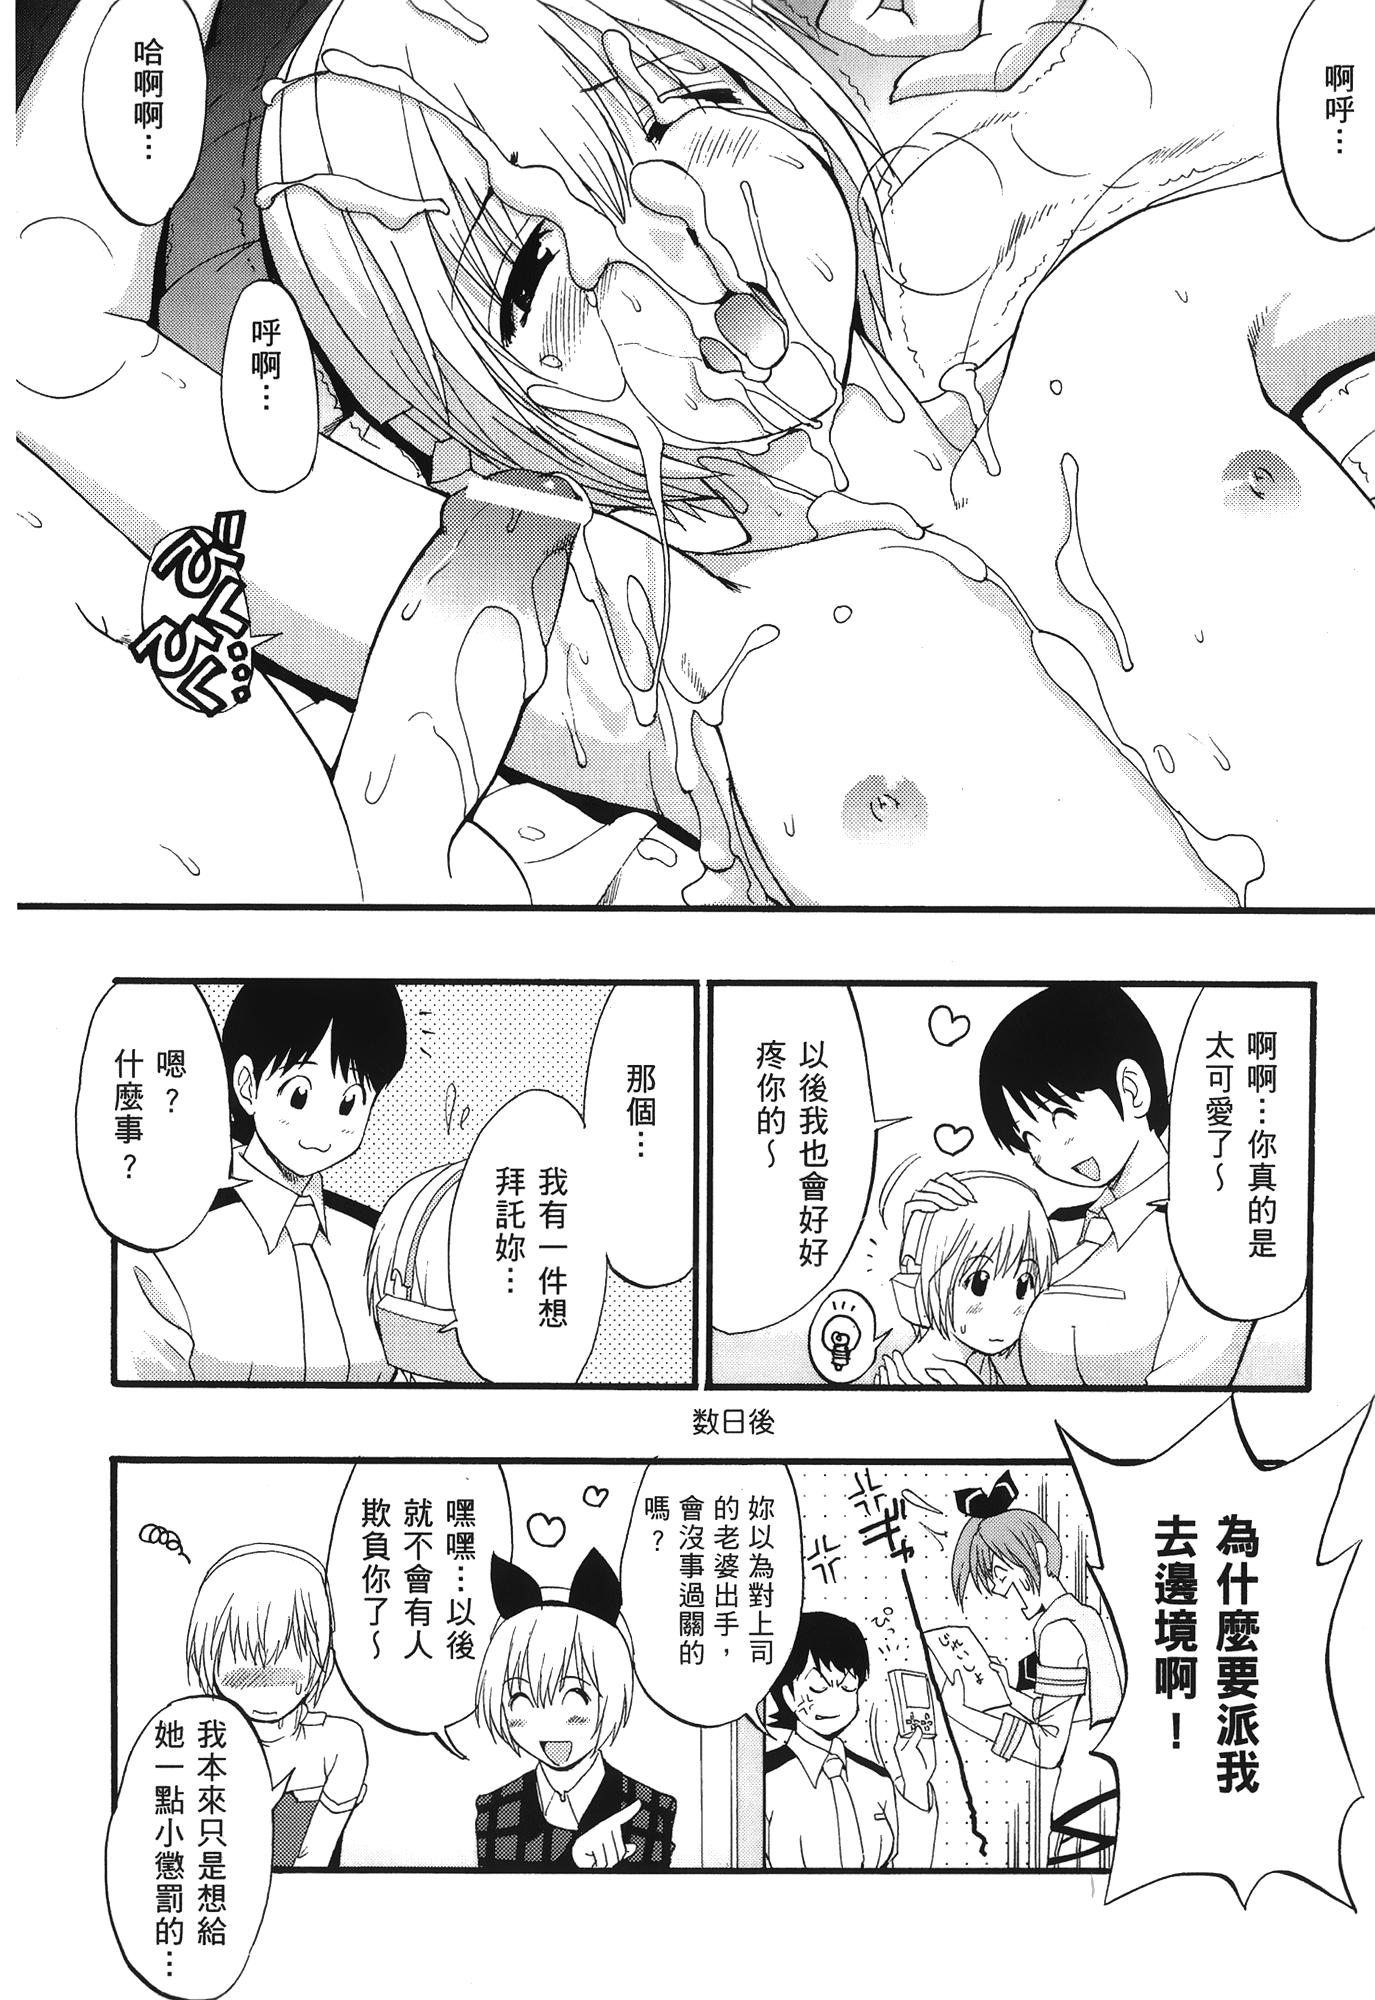 Paja [Saigado] THE YURI & FRIENDS 6 (King of Fighters) | 武鬥美少女 [Chinese] - King of fighters Brunettes - Page 159